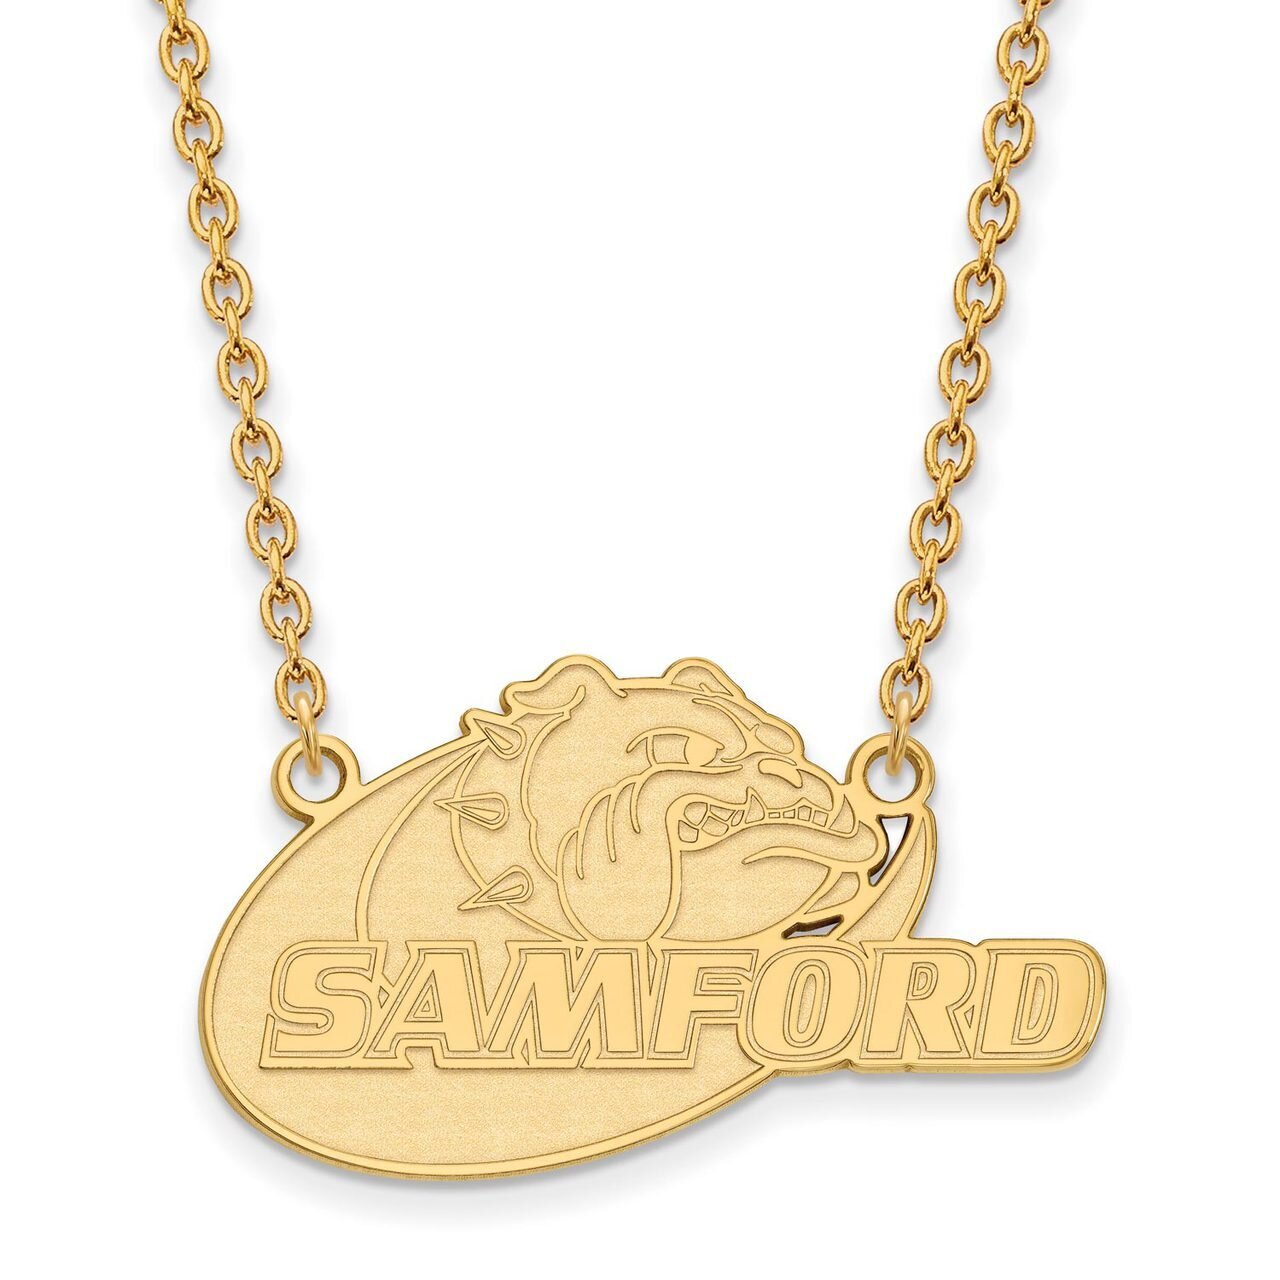 Samford University Large Pendant with Chain Necklace 10k Yellow Gold 1Y008SMF-18